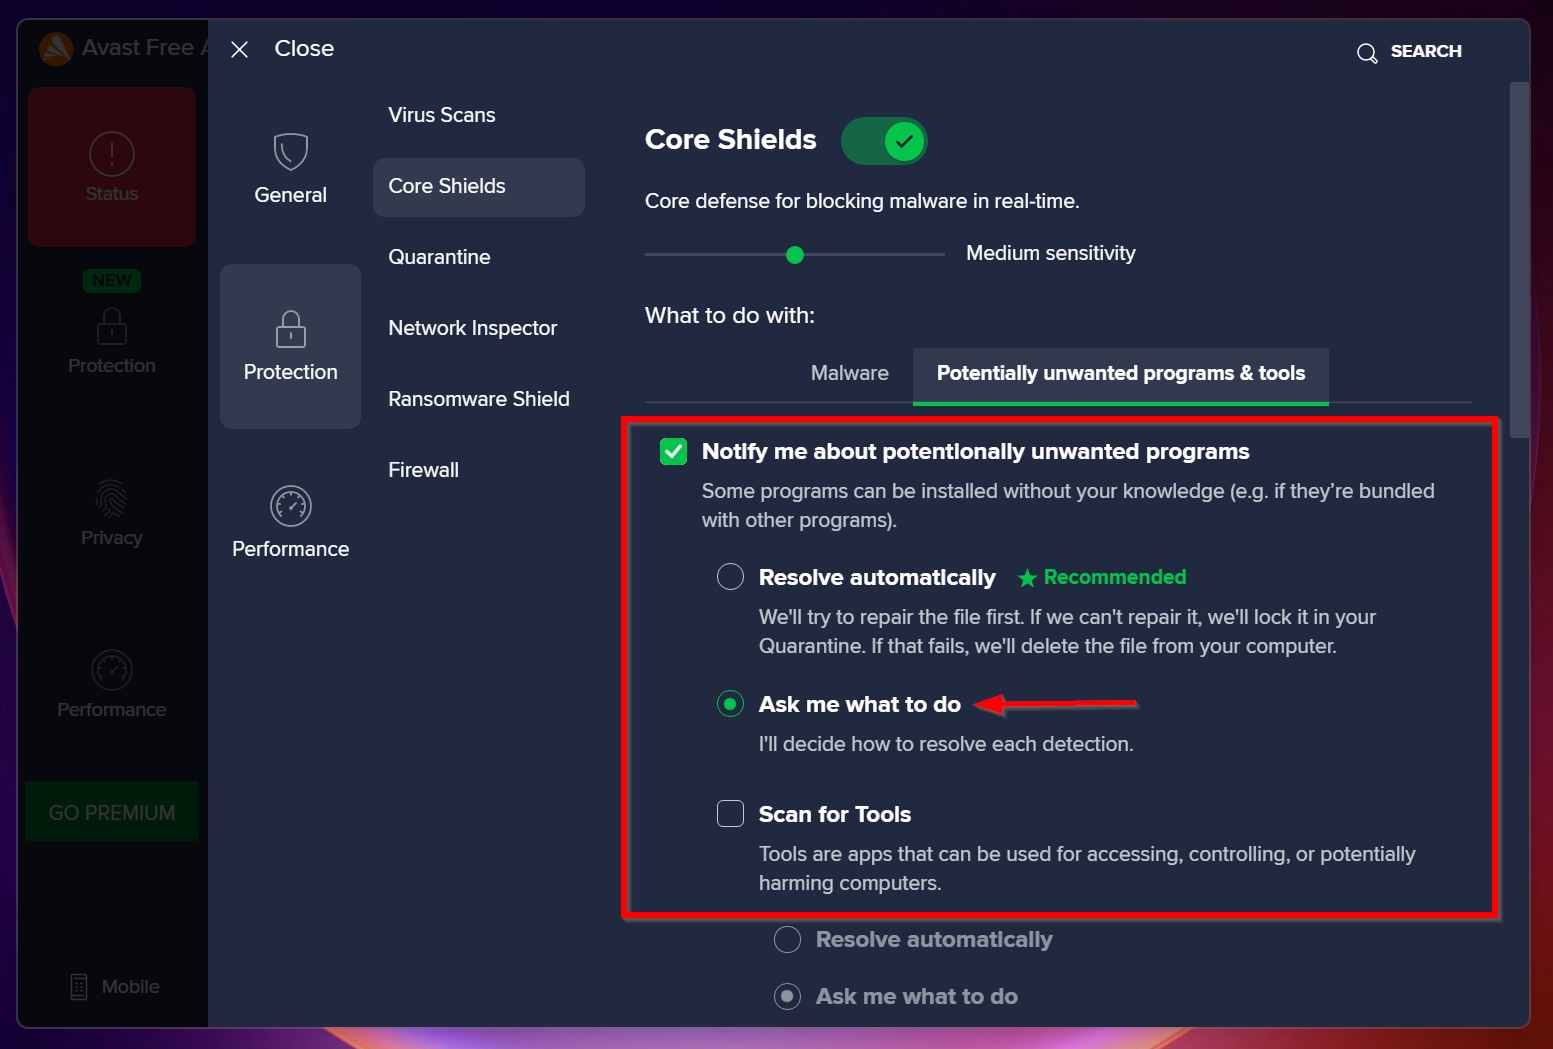 Potentially unwanted tools and programs detection settings in Avast.